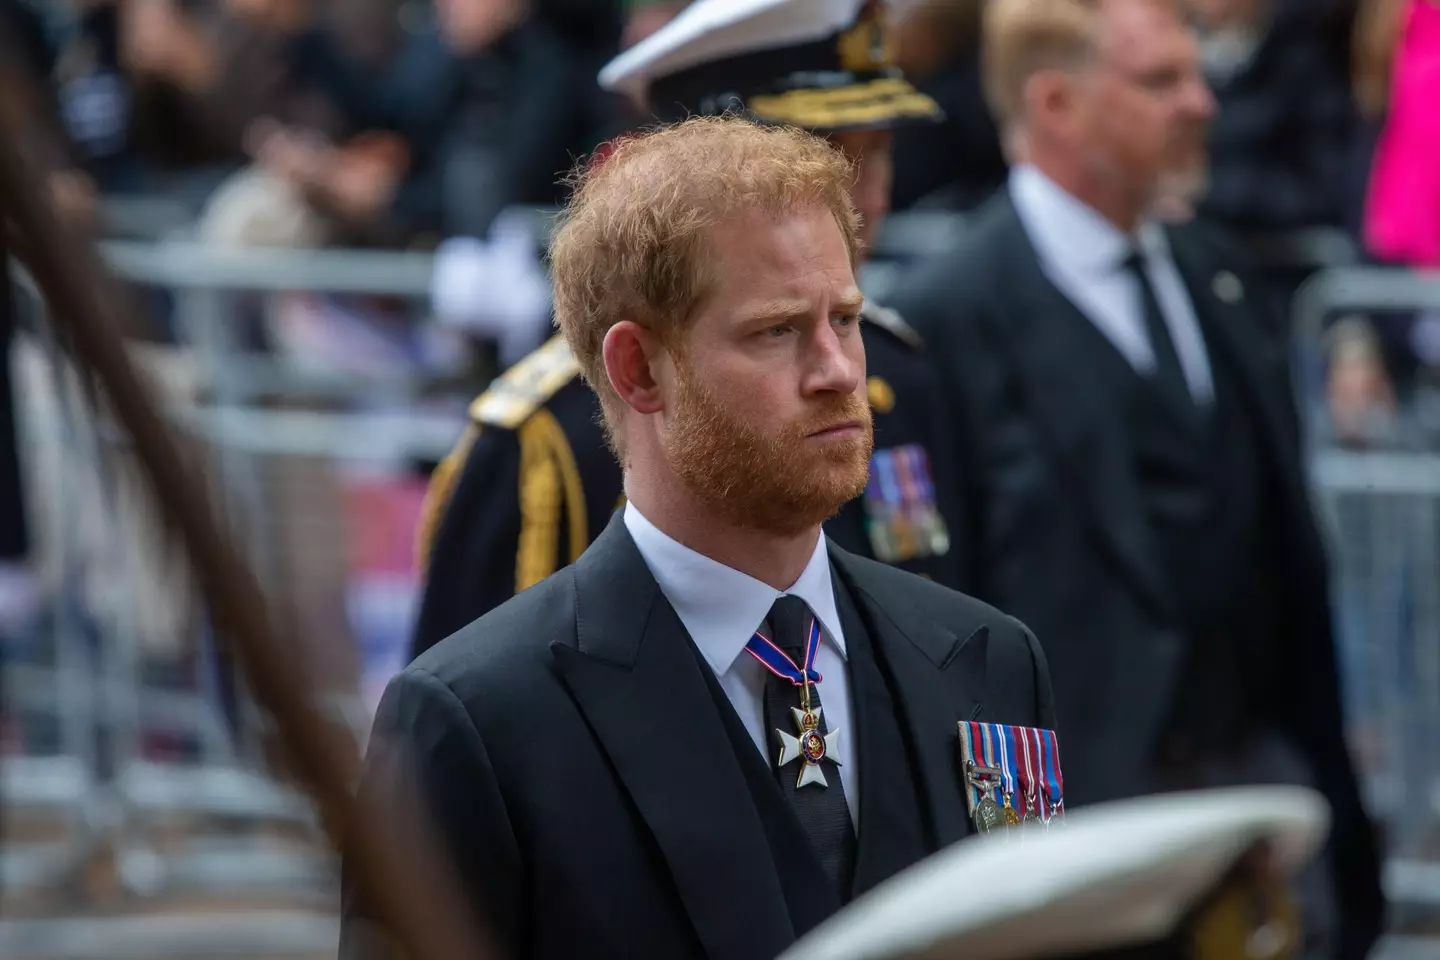 Prince Harry is donating a portion of the profits from the book to charity.